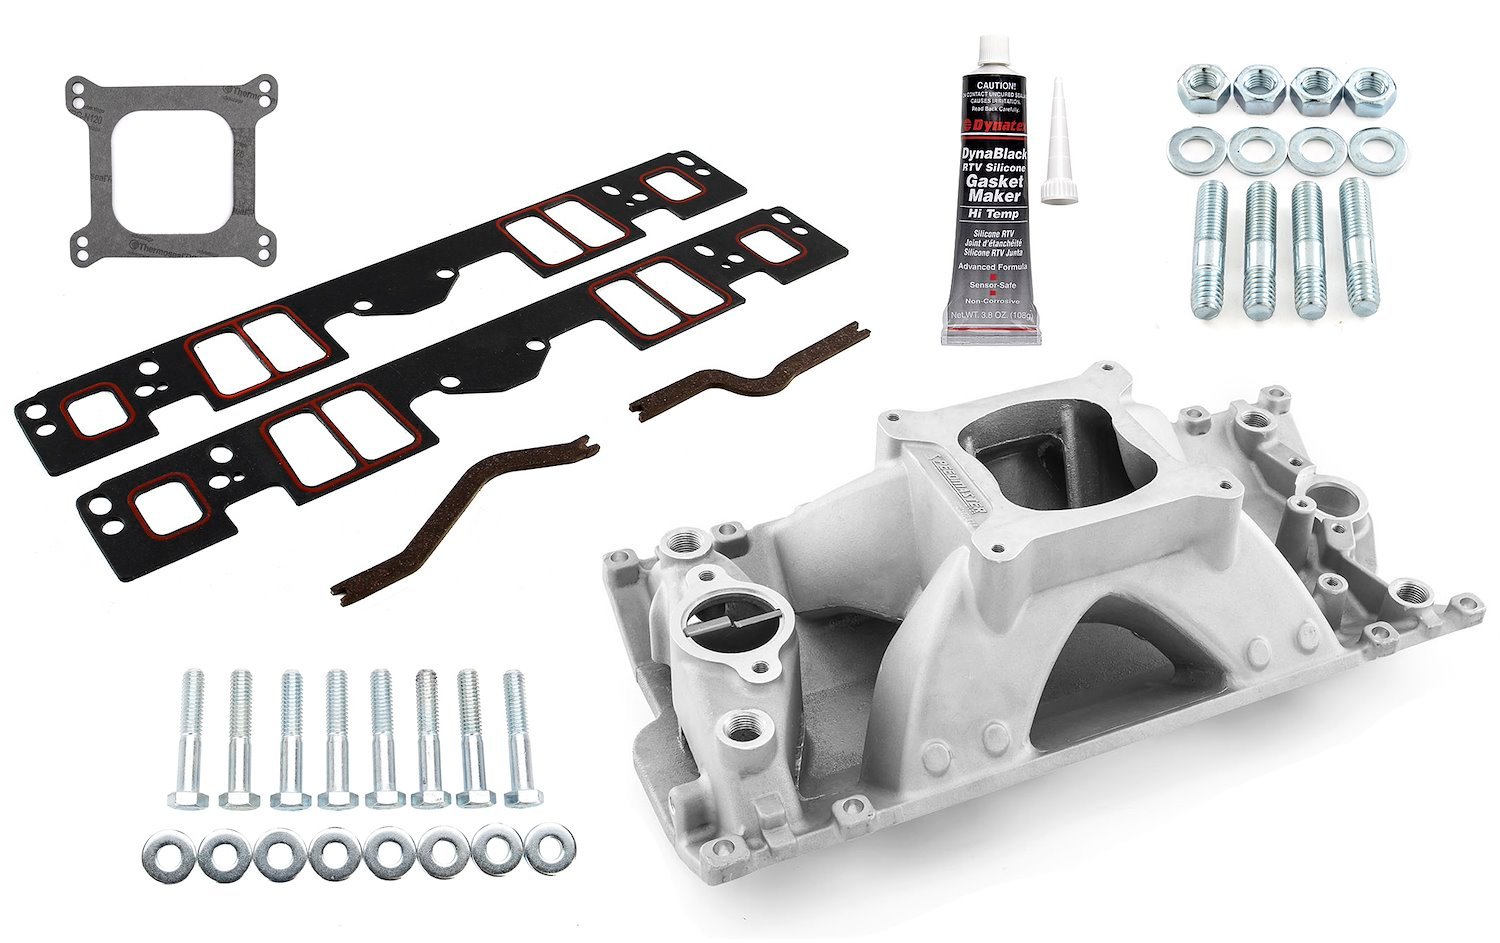 HiRise Intake Manifold Kit for Small Block Chevy 350 Vortec